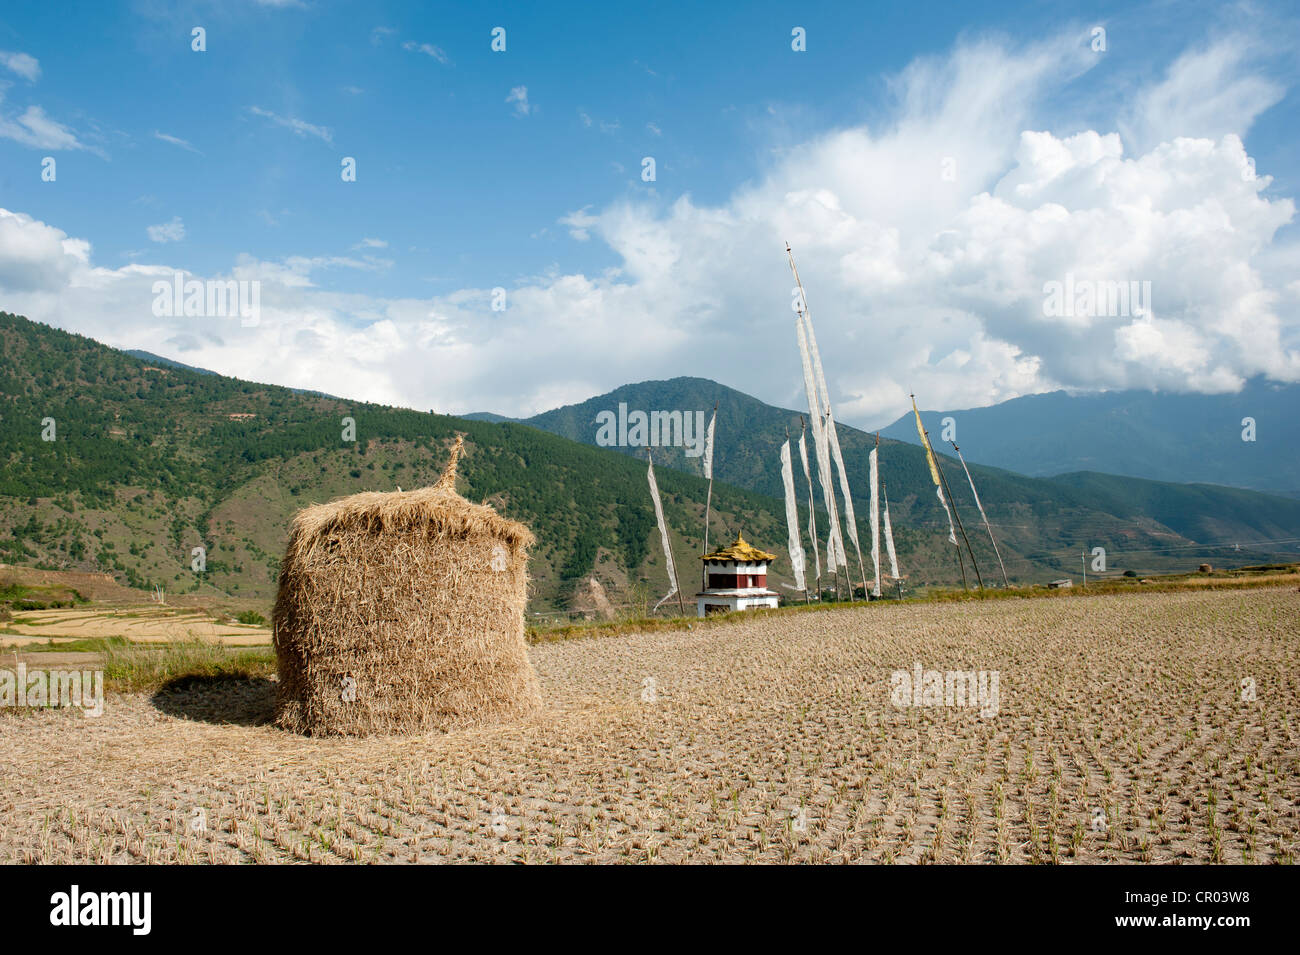 Place of pilgrimage, pile of straw, field near the Chimi Lakhang fertility temple, chorten with flags, near Punakha Stock Photo